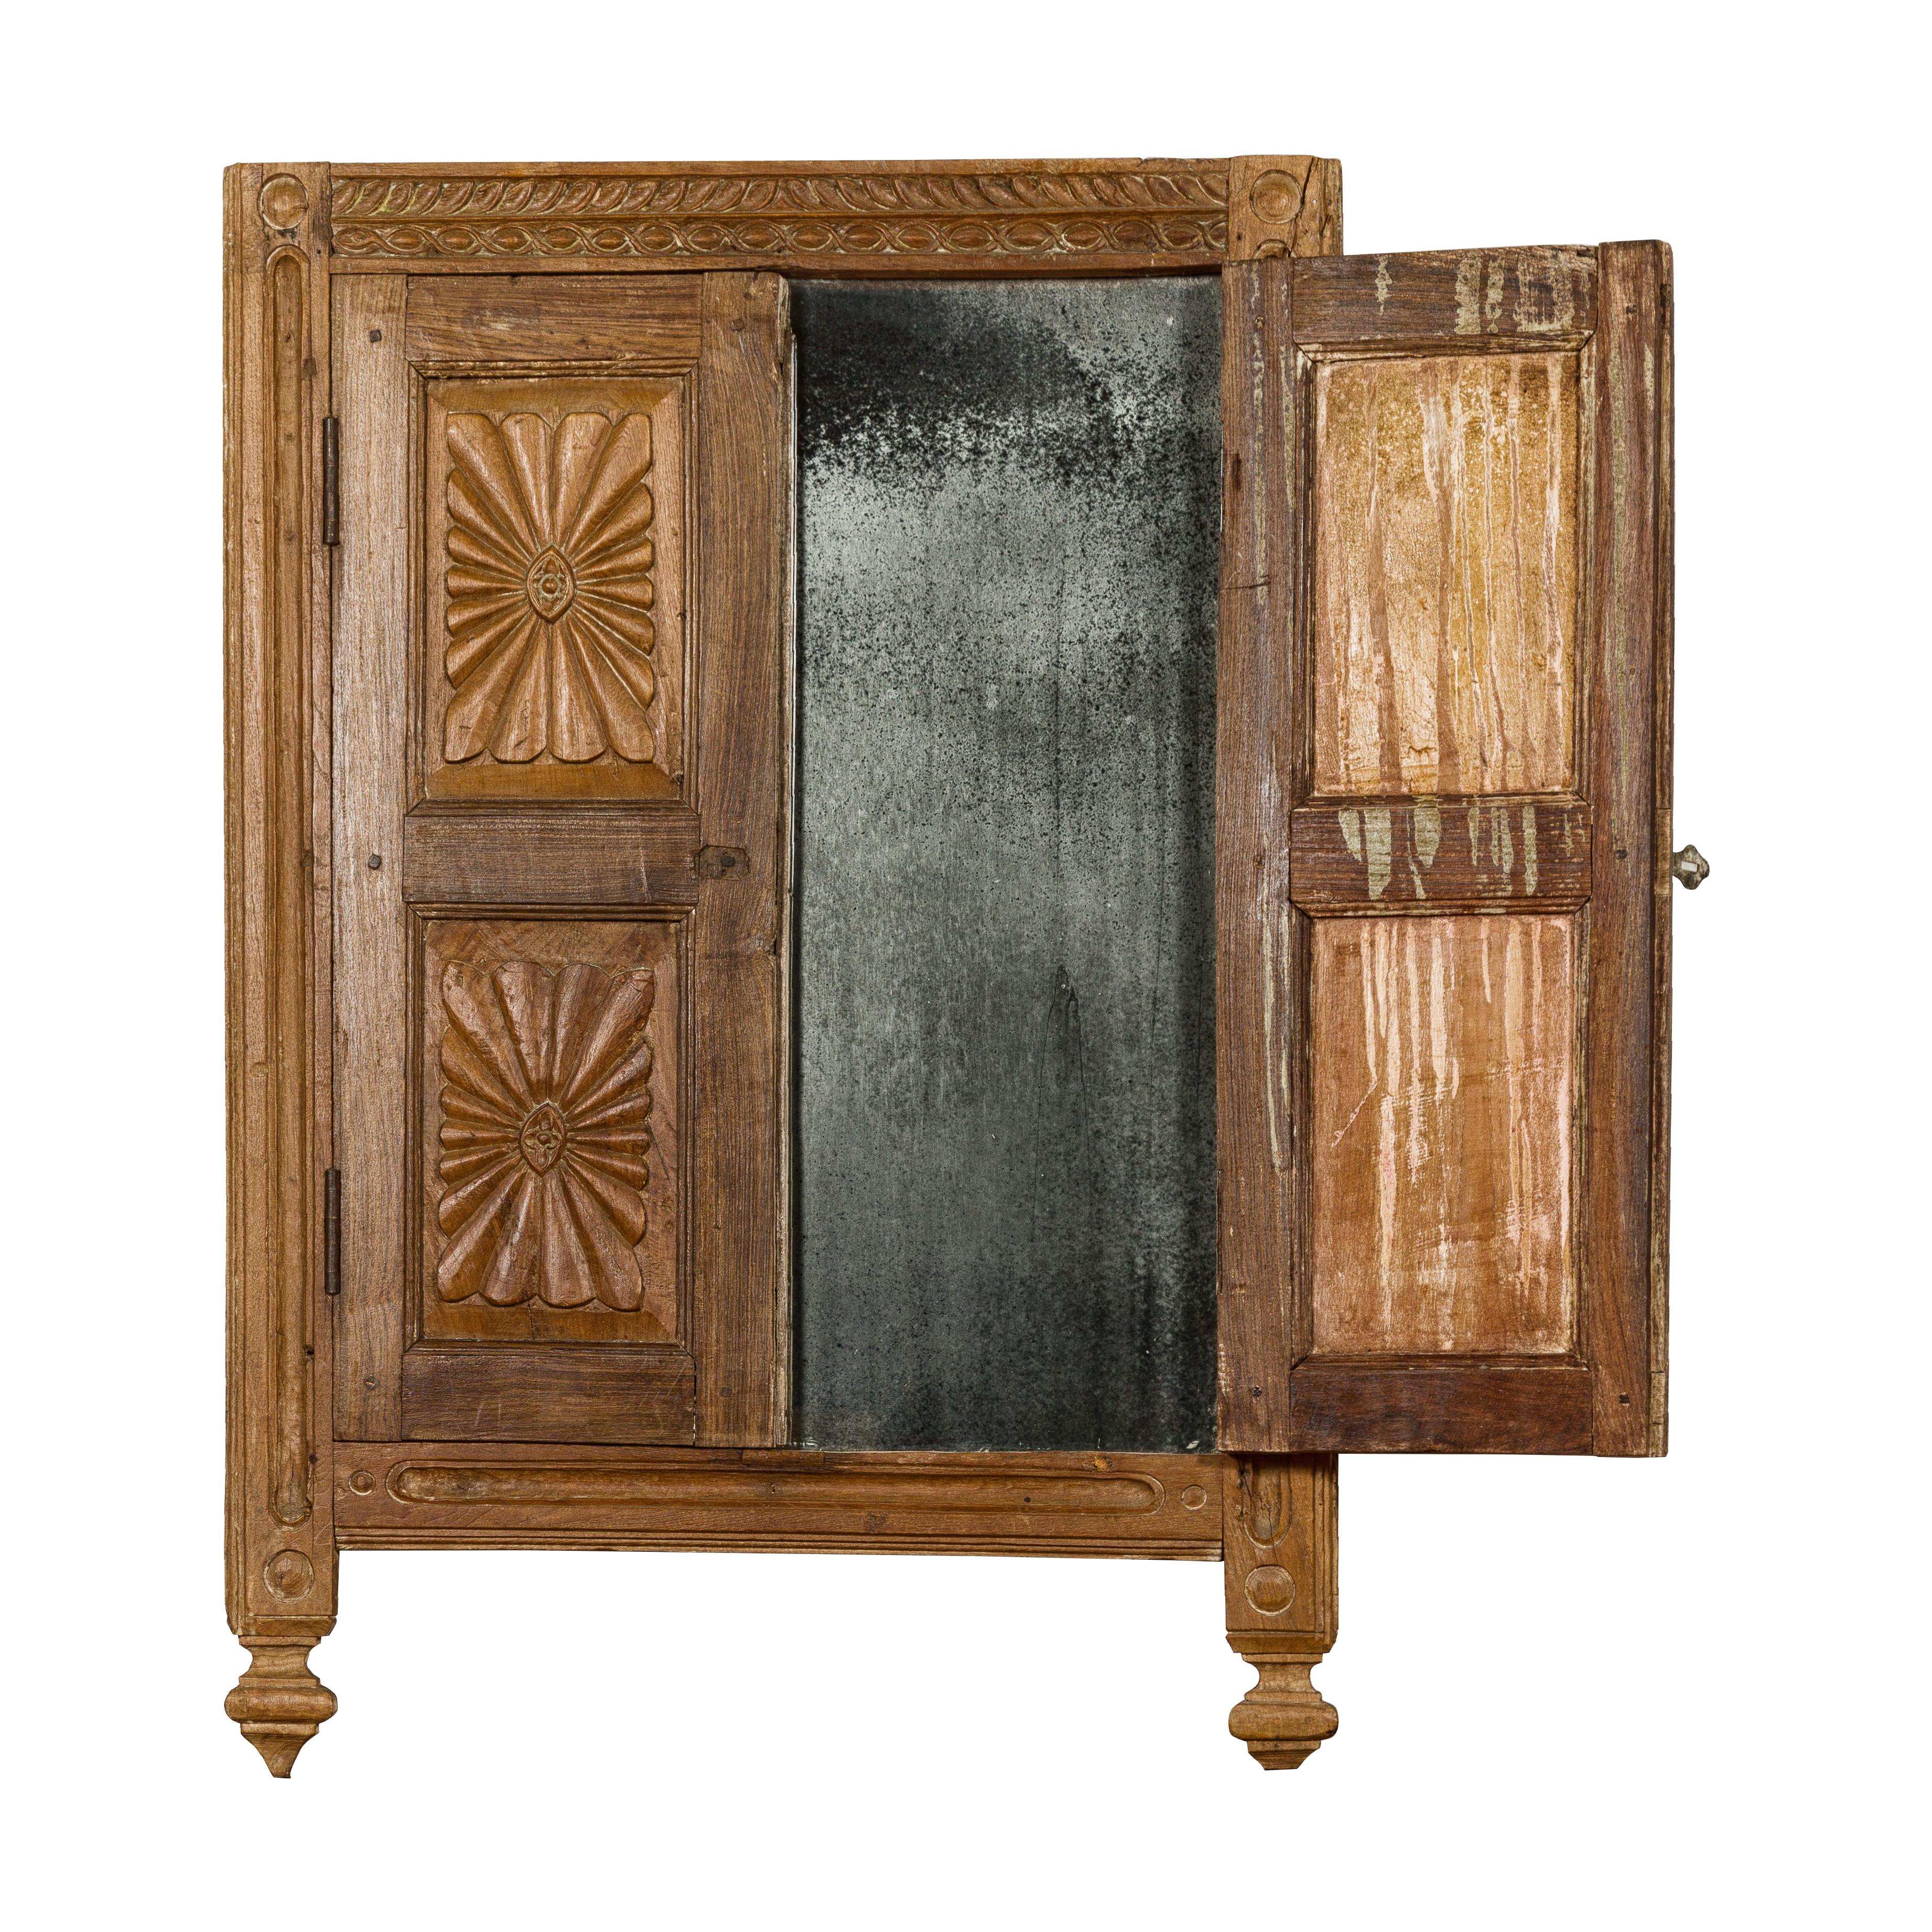 An antique Indian carved wooden window retrofitted with a smoky heavily antiqued mirror. This antique Indian carved wooden window, thoughtfully retrofitted with a smoky, heavily antiqued mirror, is a captivating piece that merges history with